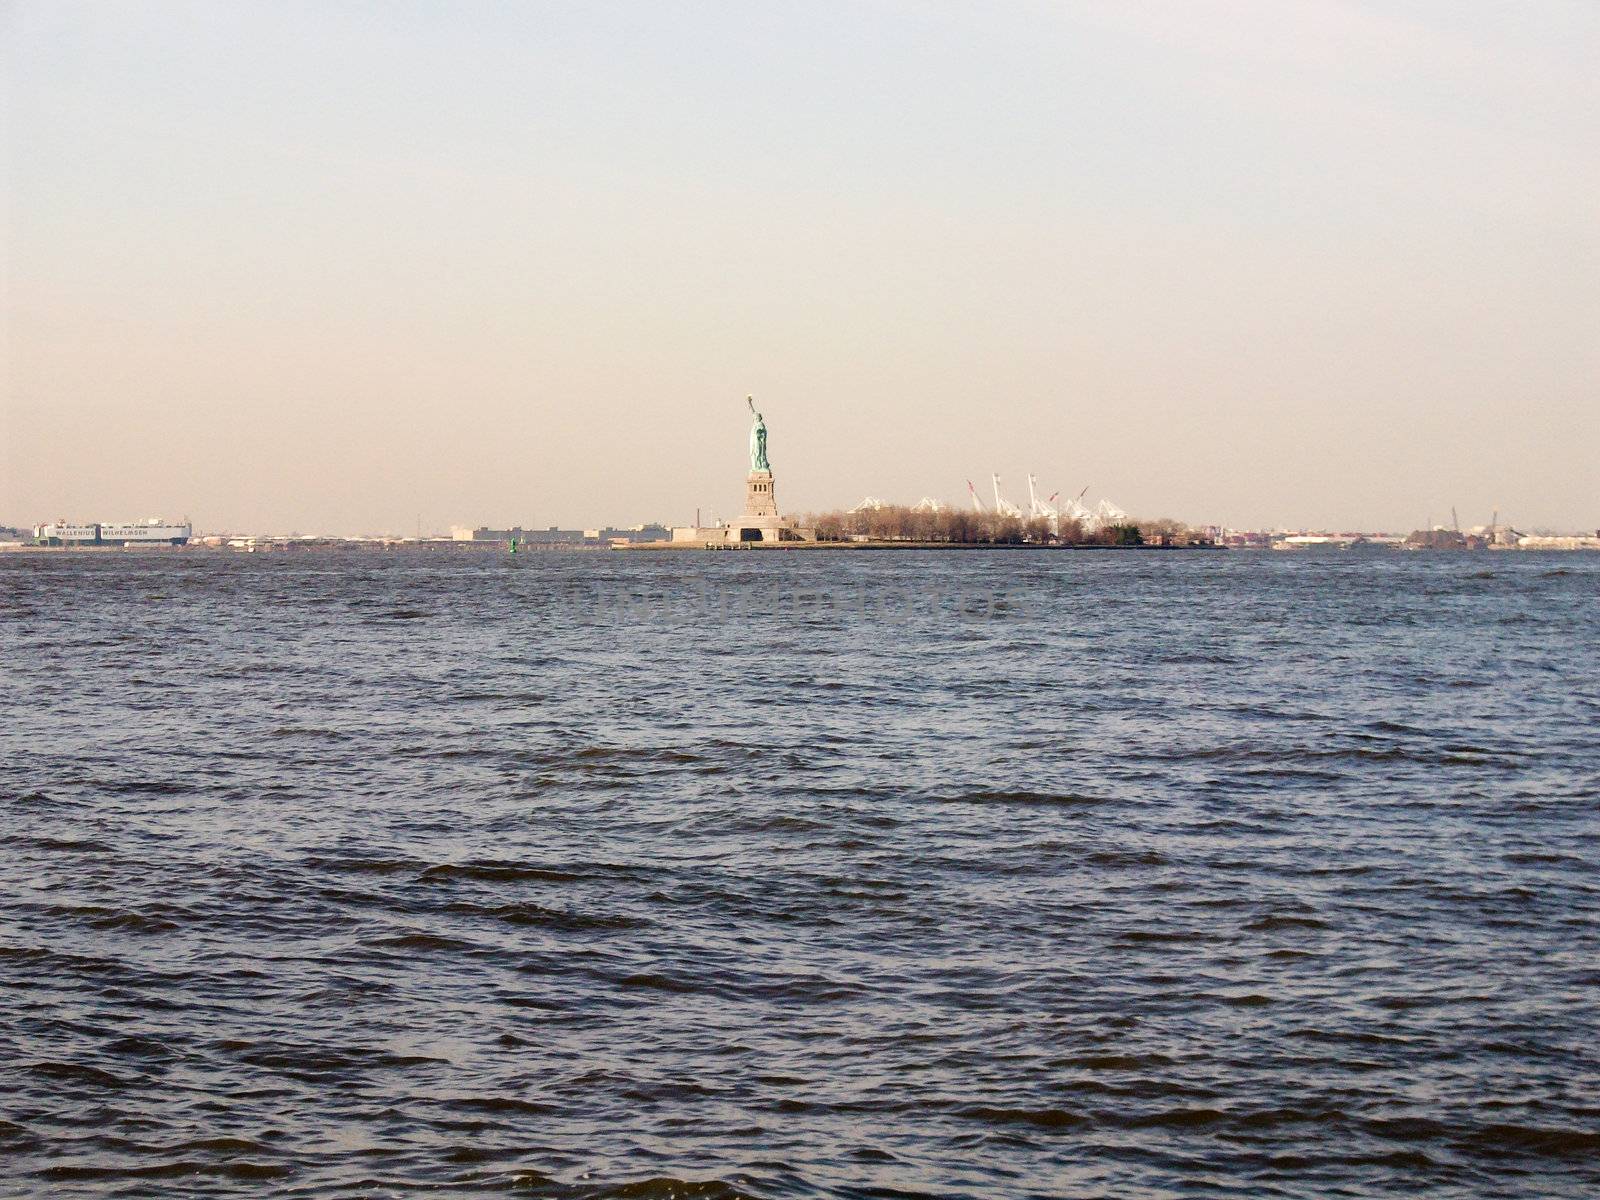 River View of the Statue of Liberty by RefocusPhoto